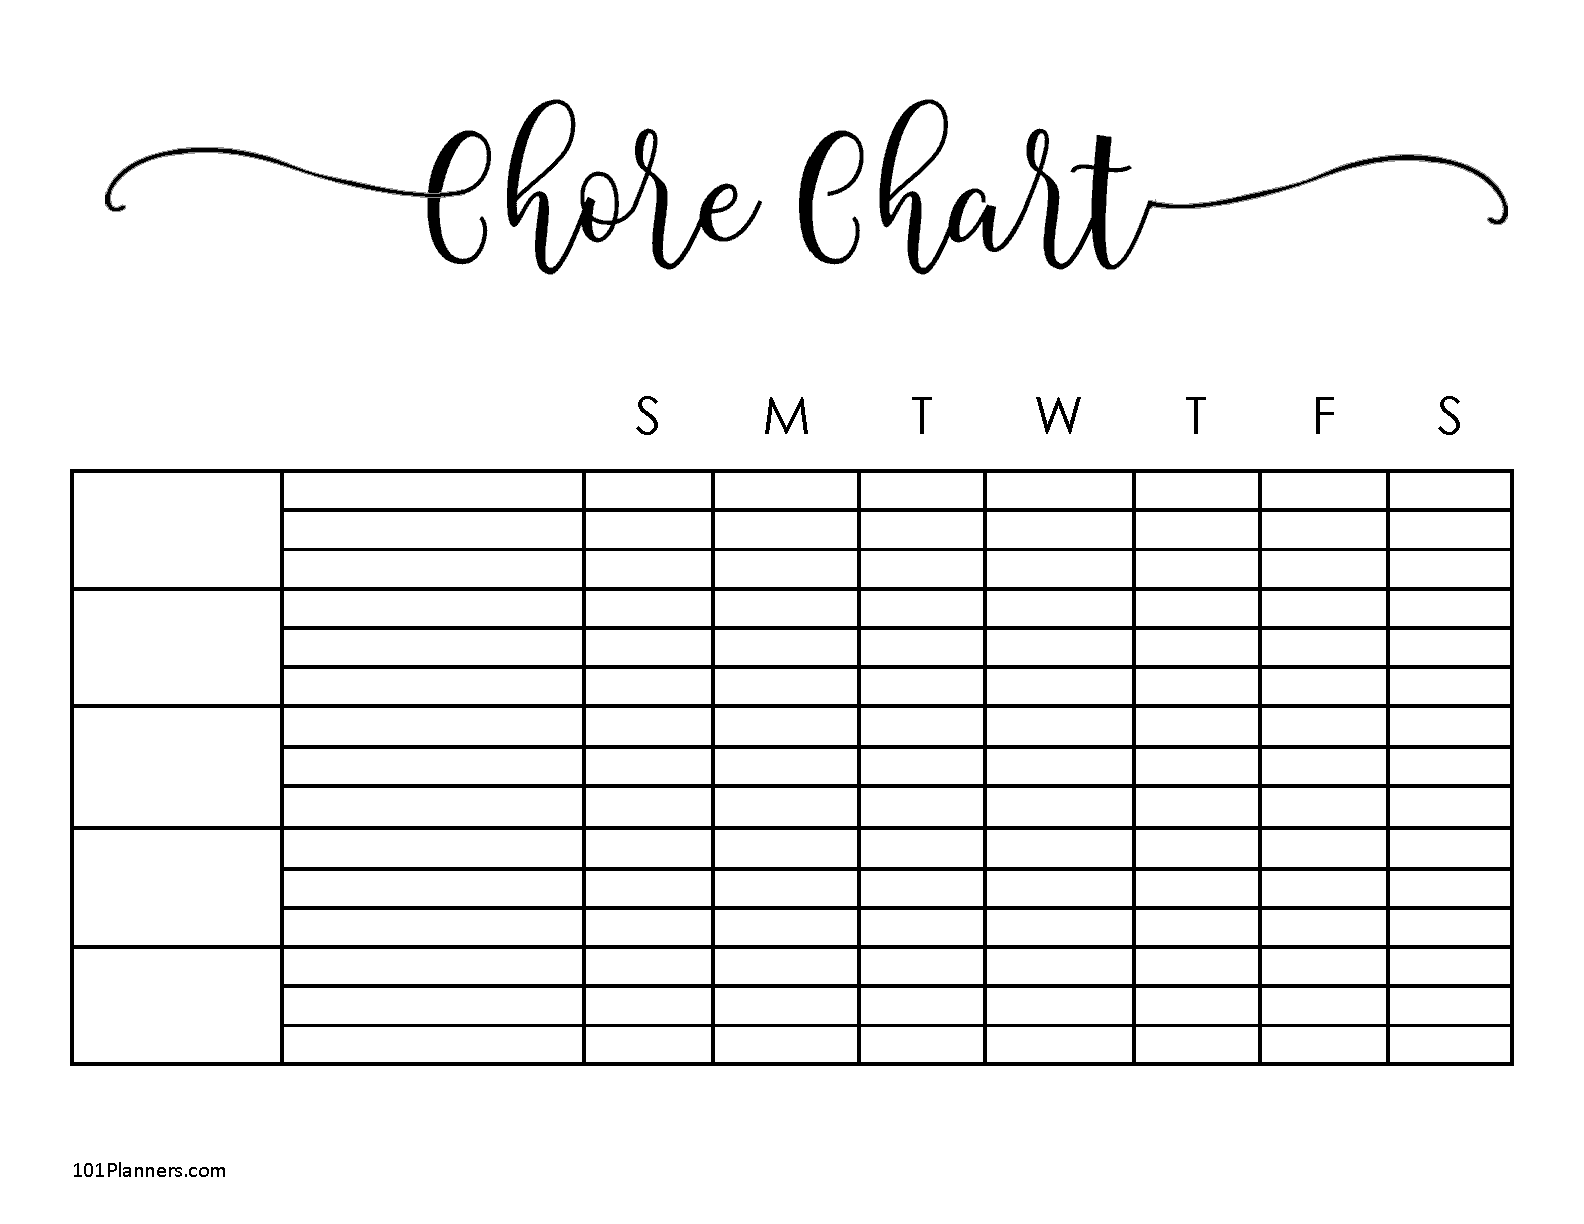 Family Chore Chart Template from www.101planners.com